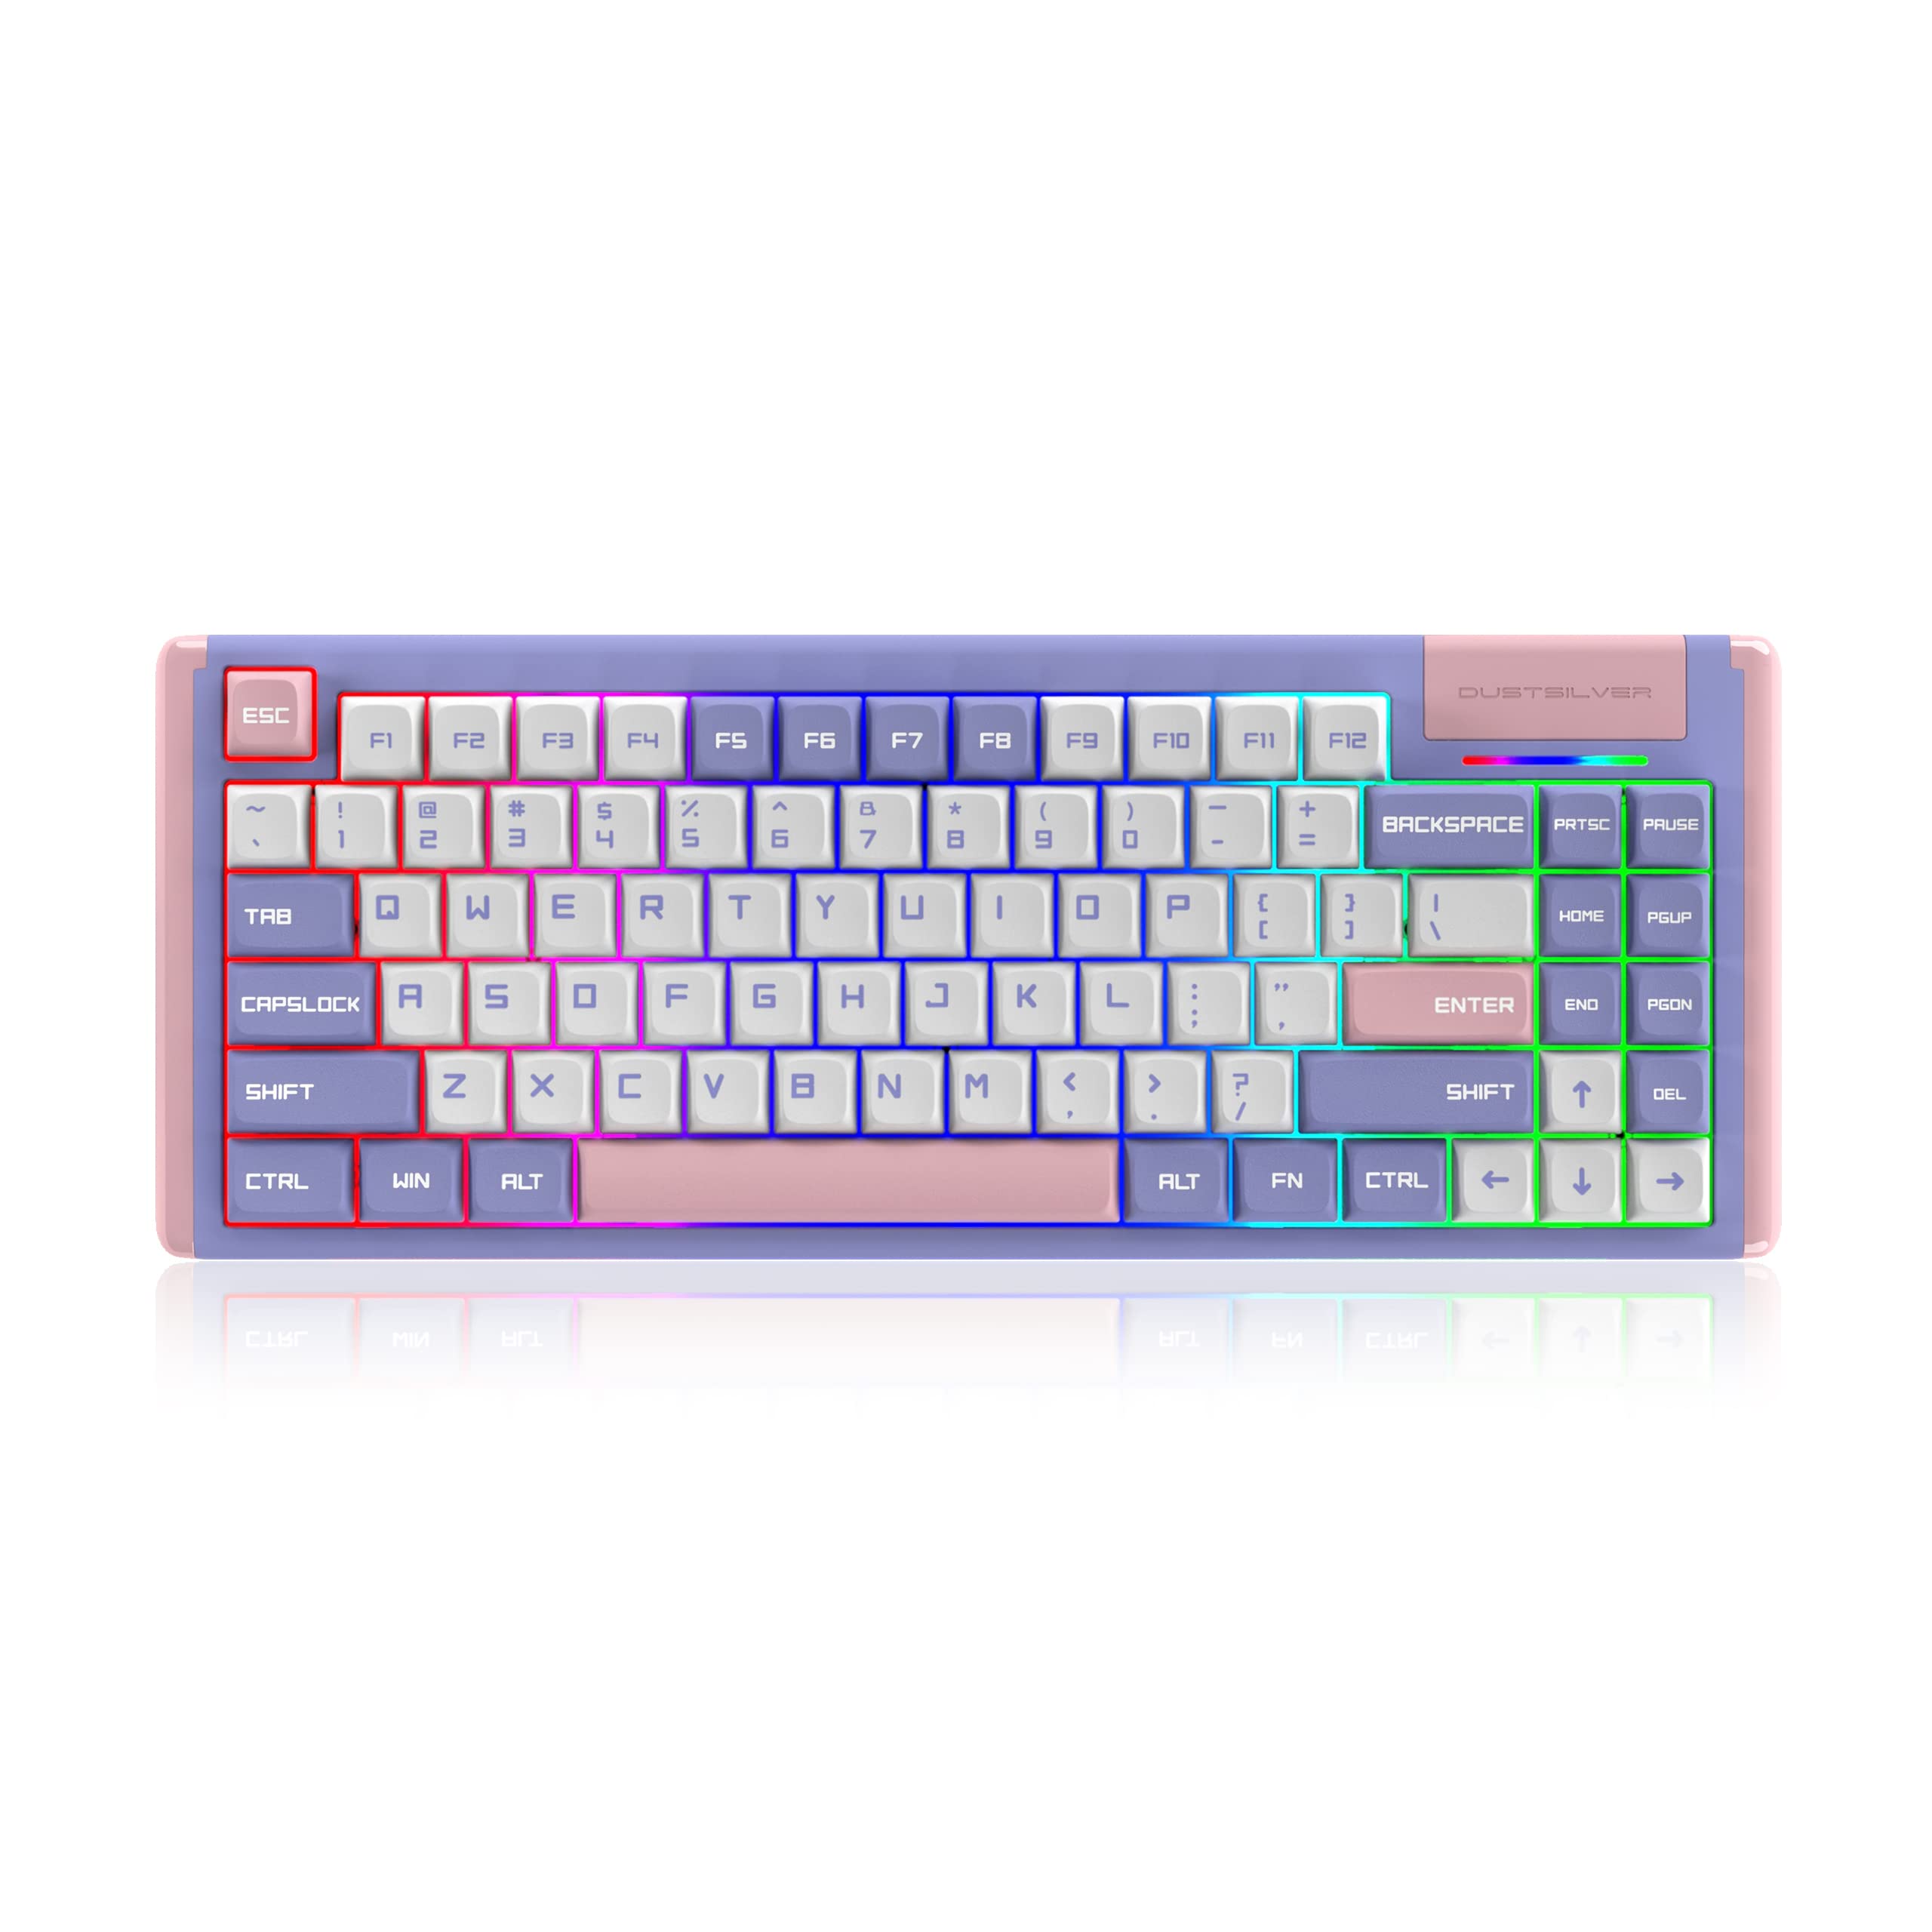 DUSTSILVER Wireless Keyboard Mechanical Gaming Keyboard Hot-swappable RGB Backlit Supports BT 5.02.4G WirelessWired 3 Modes